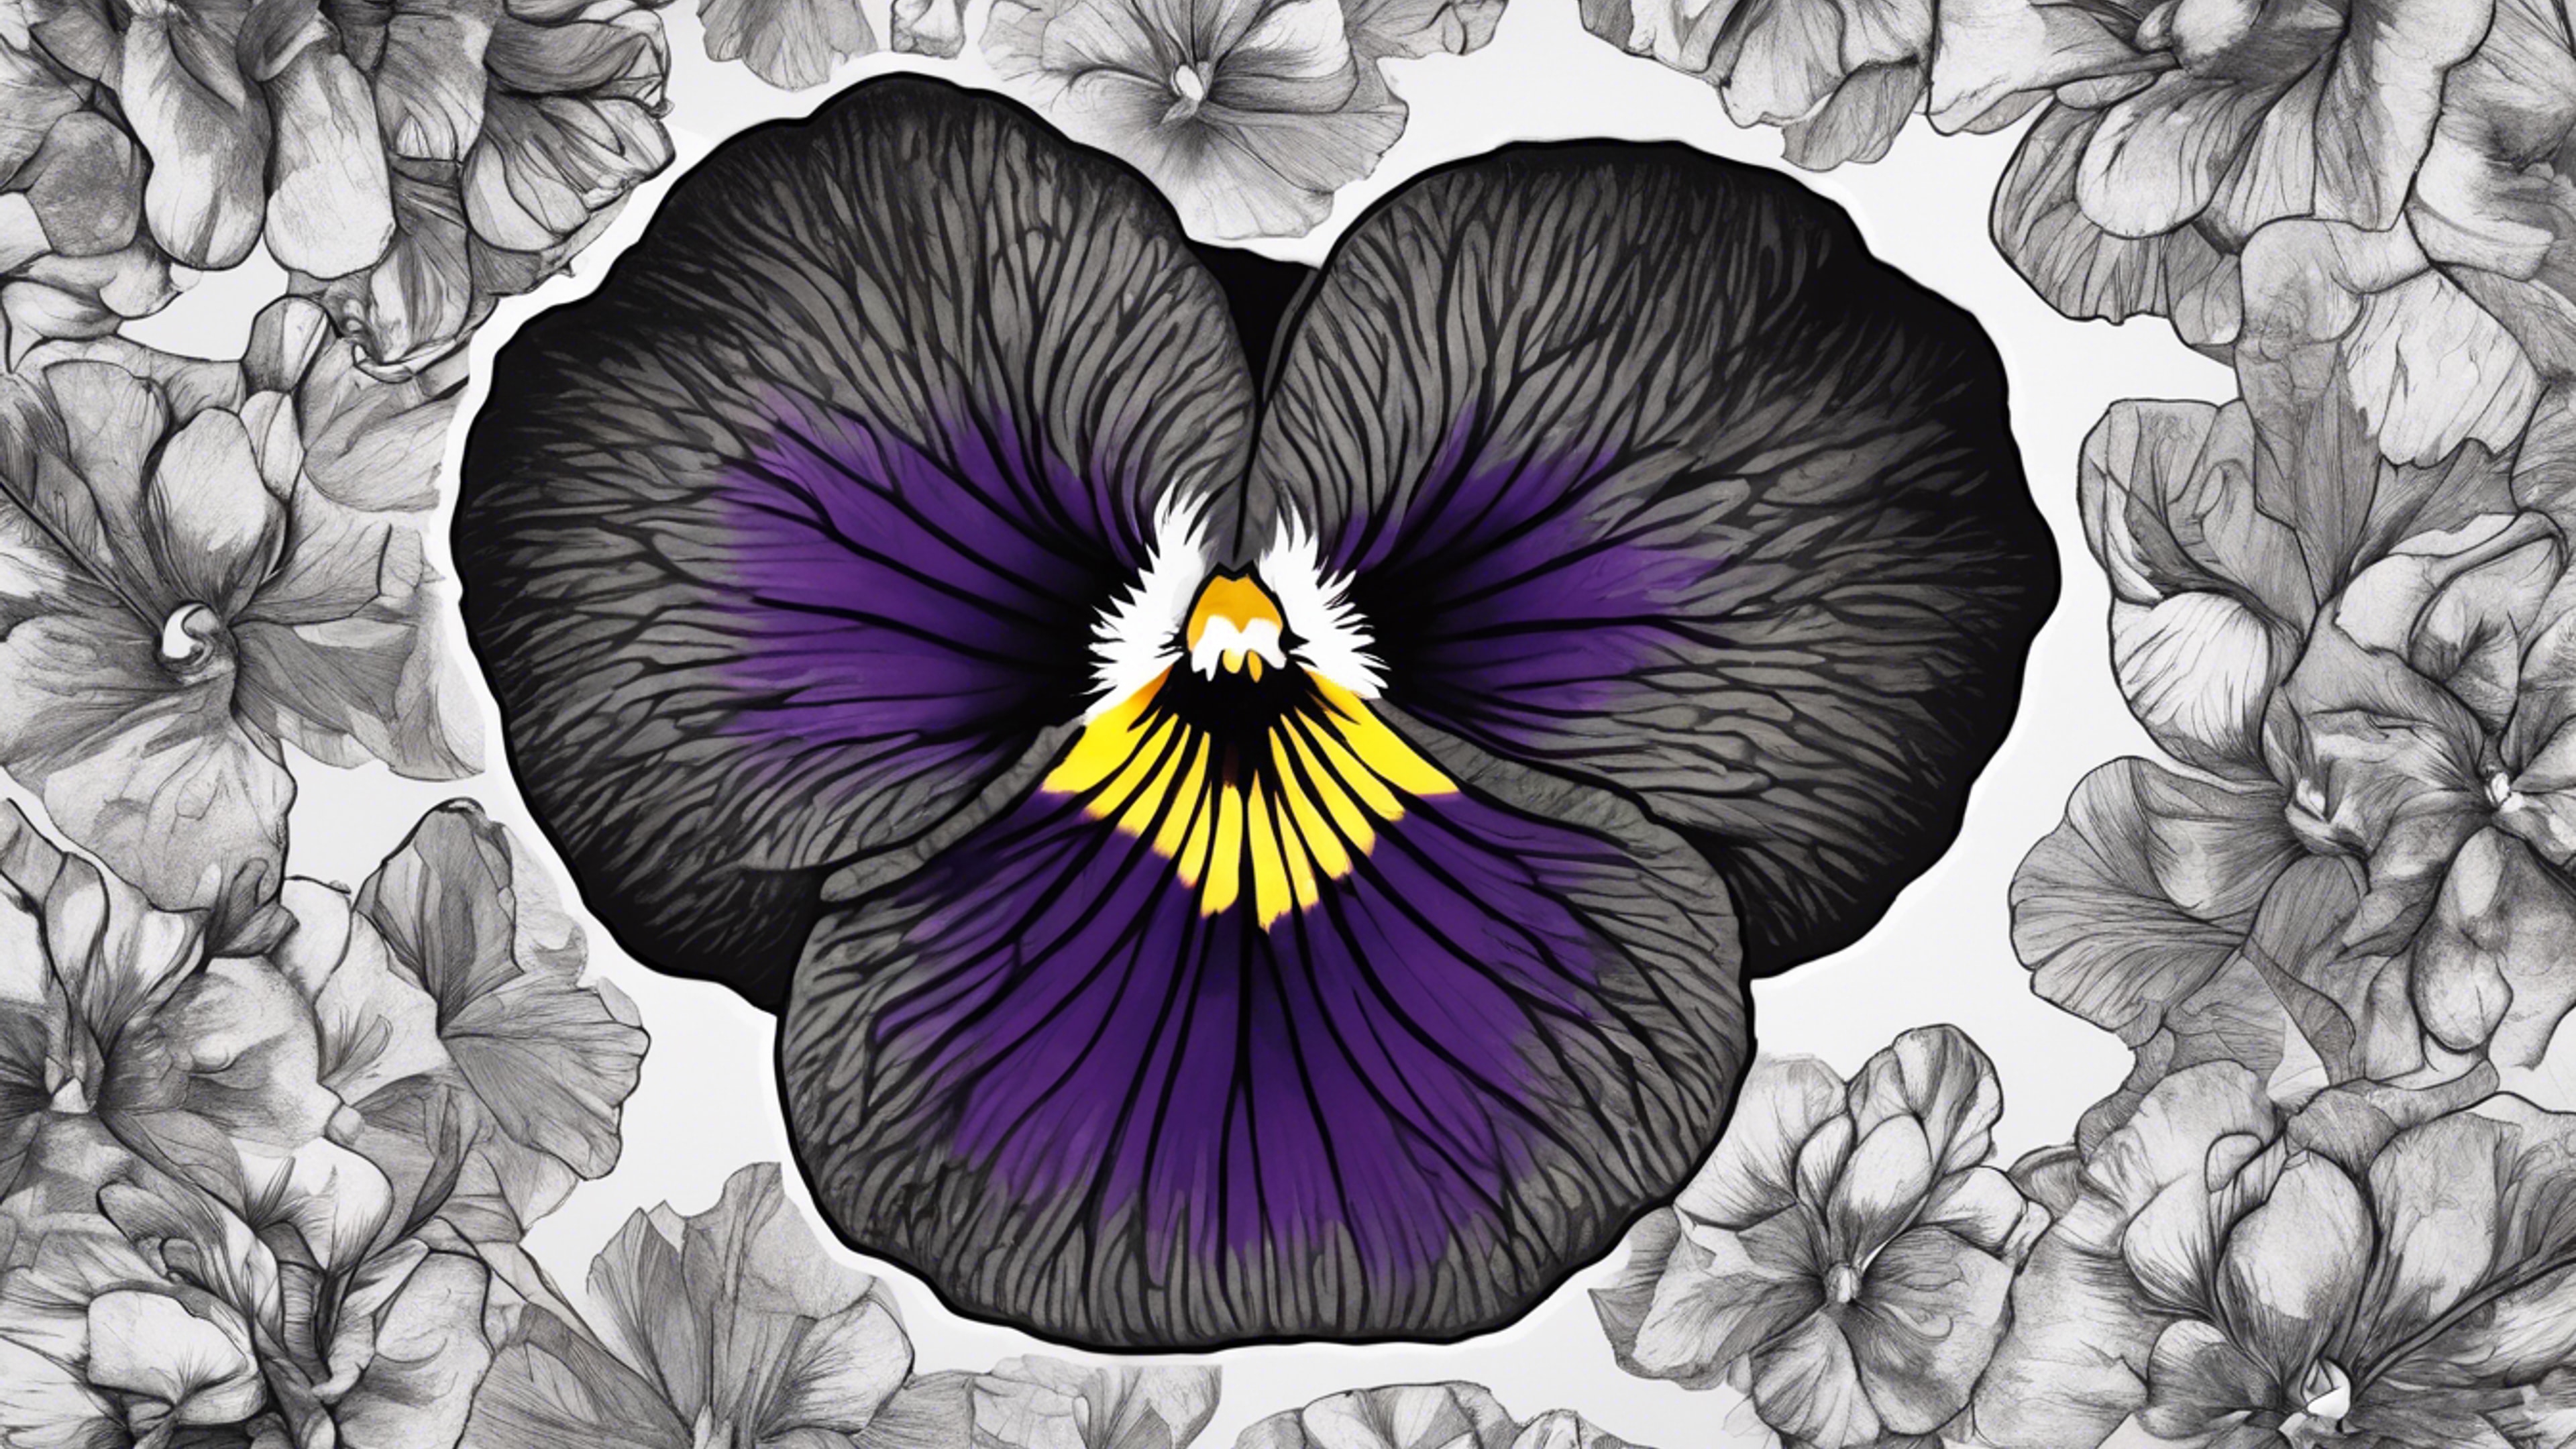 A beautifully detailed drawing of a black pansy with a heart-shaped pattern in the center. Ფონი[63bdabf8c2fc479fa211]